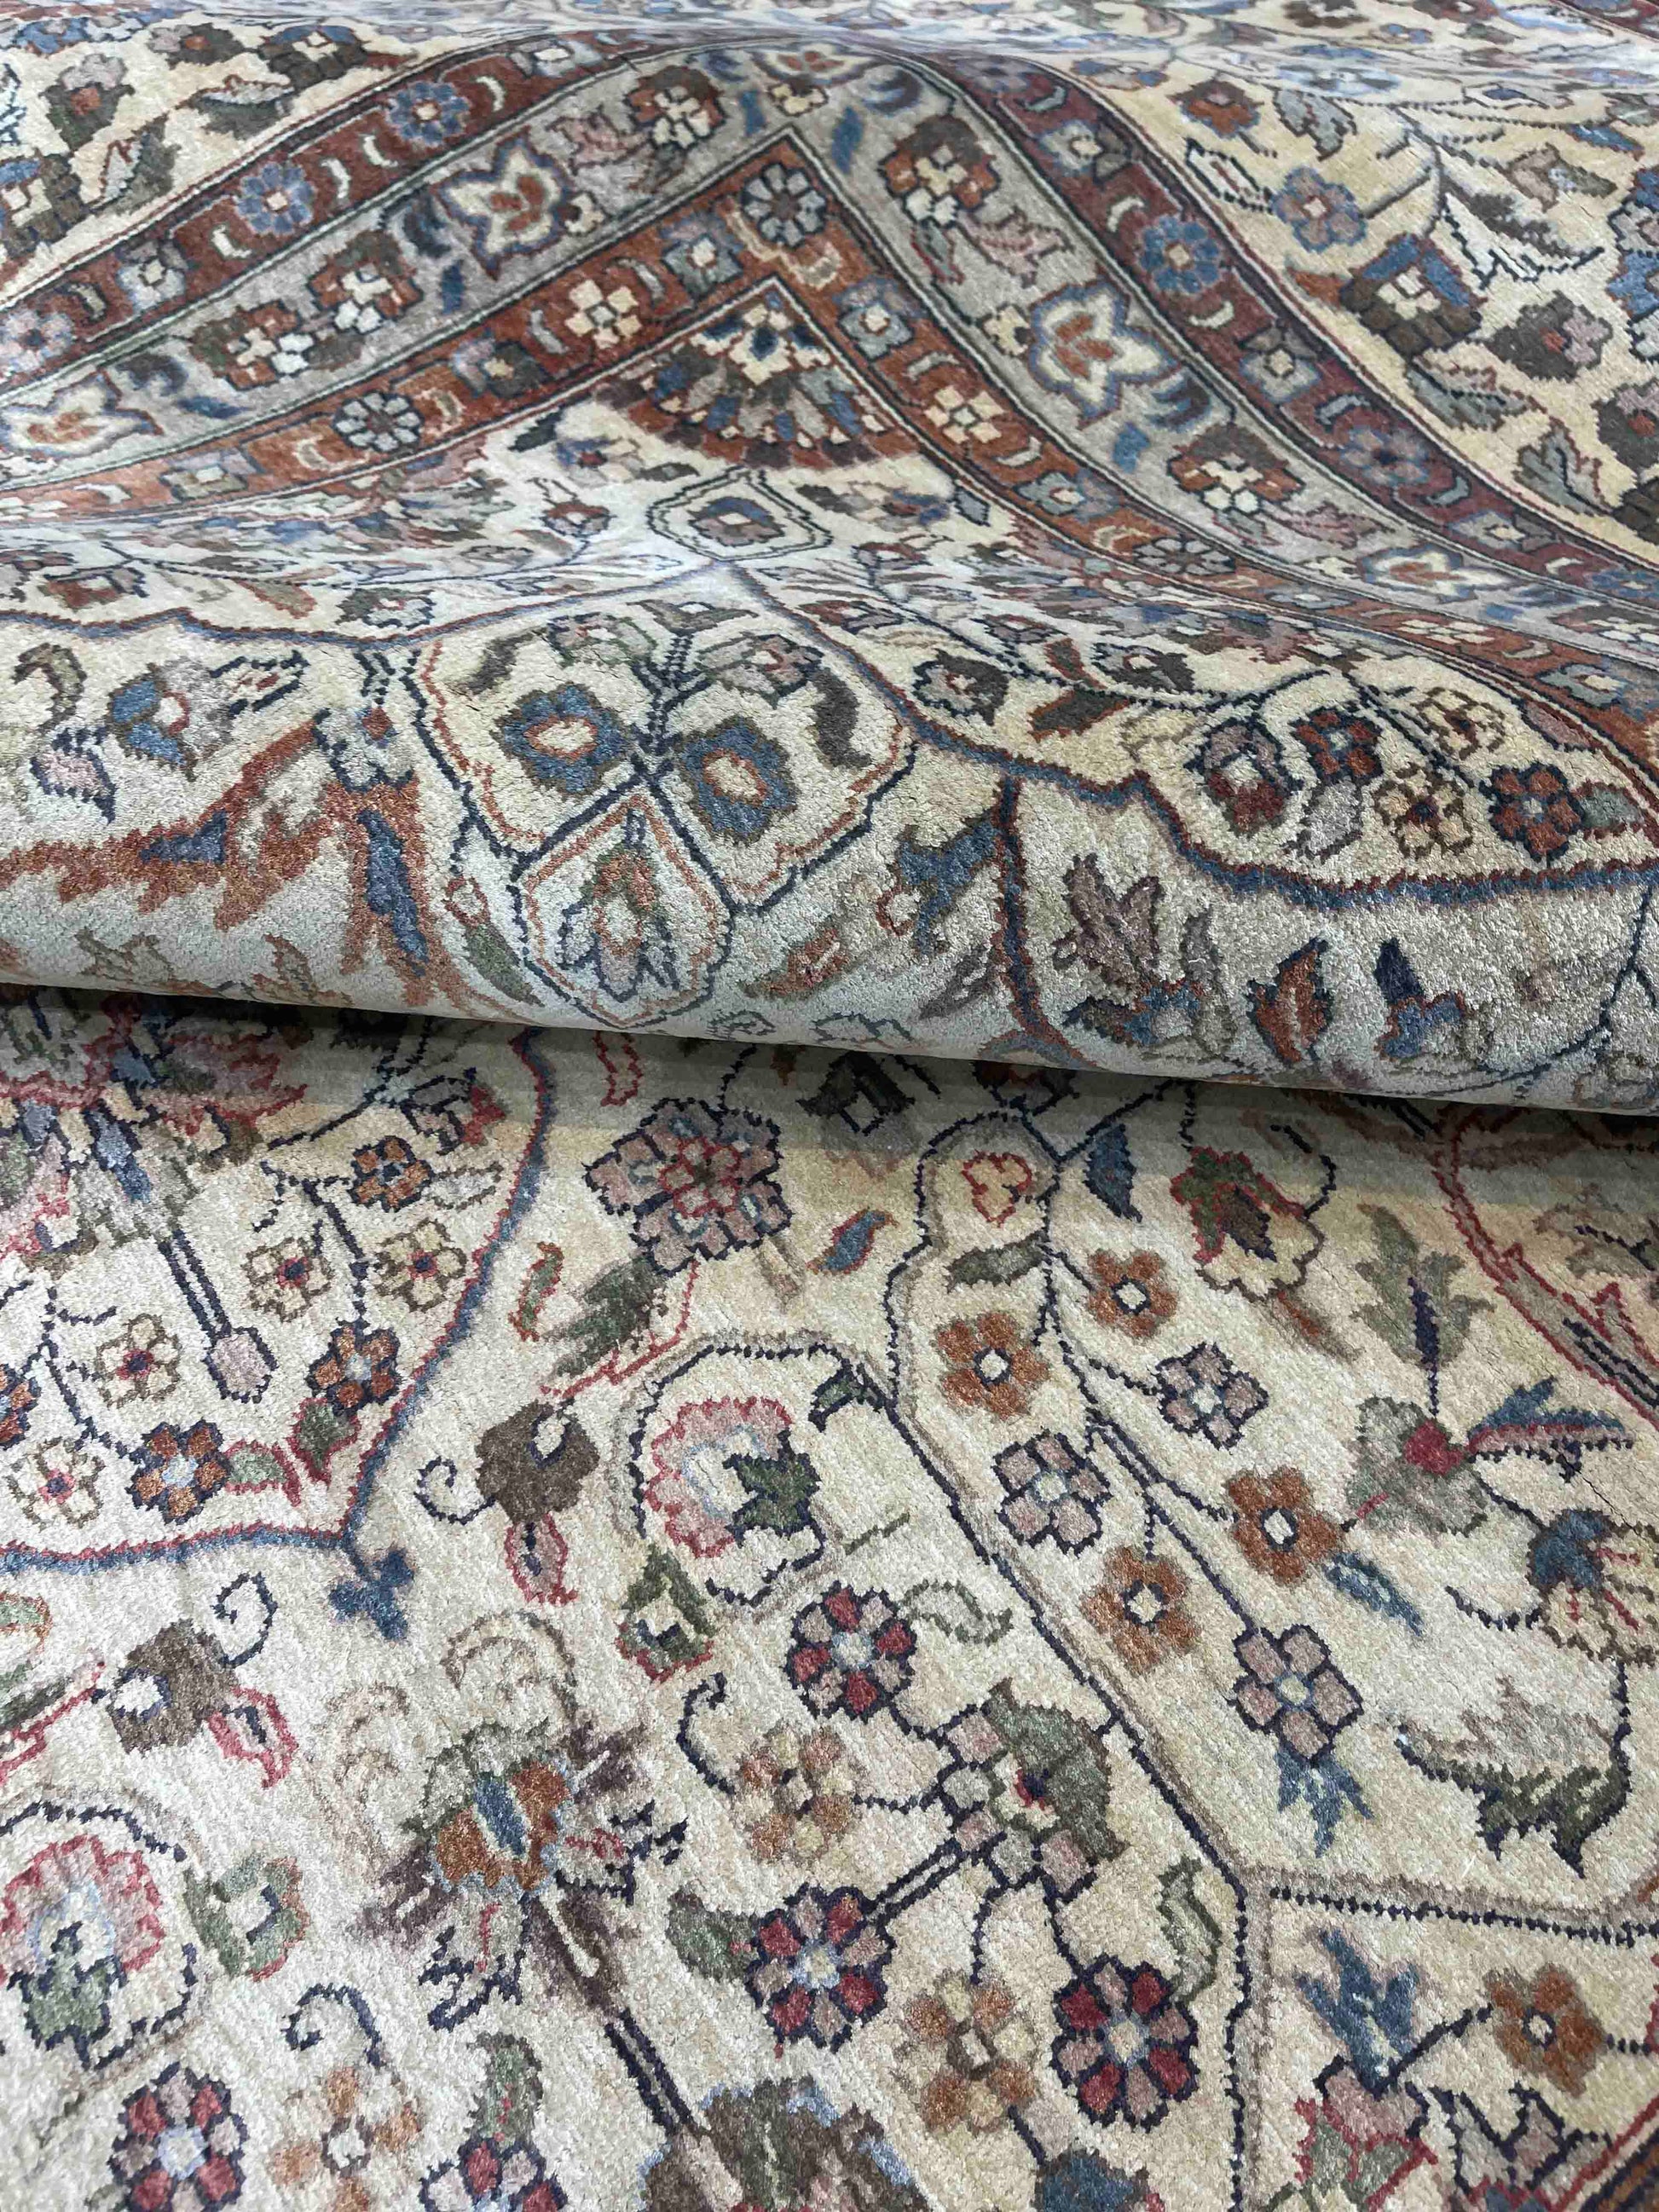 Get trendy with Pure Silk Traditional Handknotted Area Rug Camel 8.1x10.1ft 245x307cms - Traditional Rugs available at Jaipur Oriental Rugs. Grab yours for $5870.00 today!